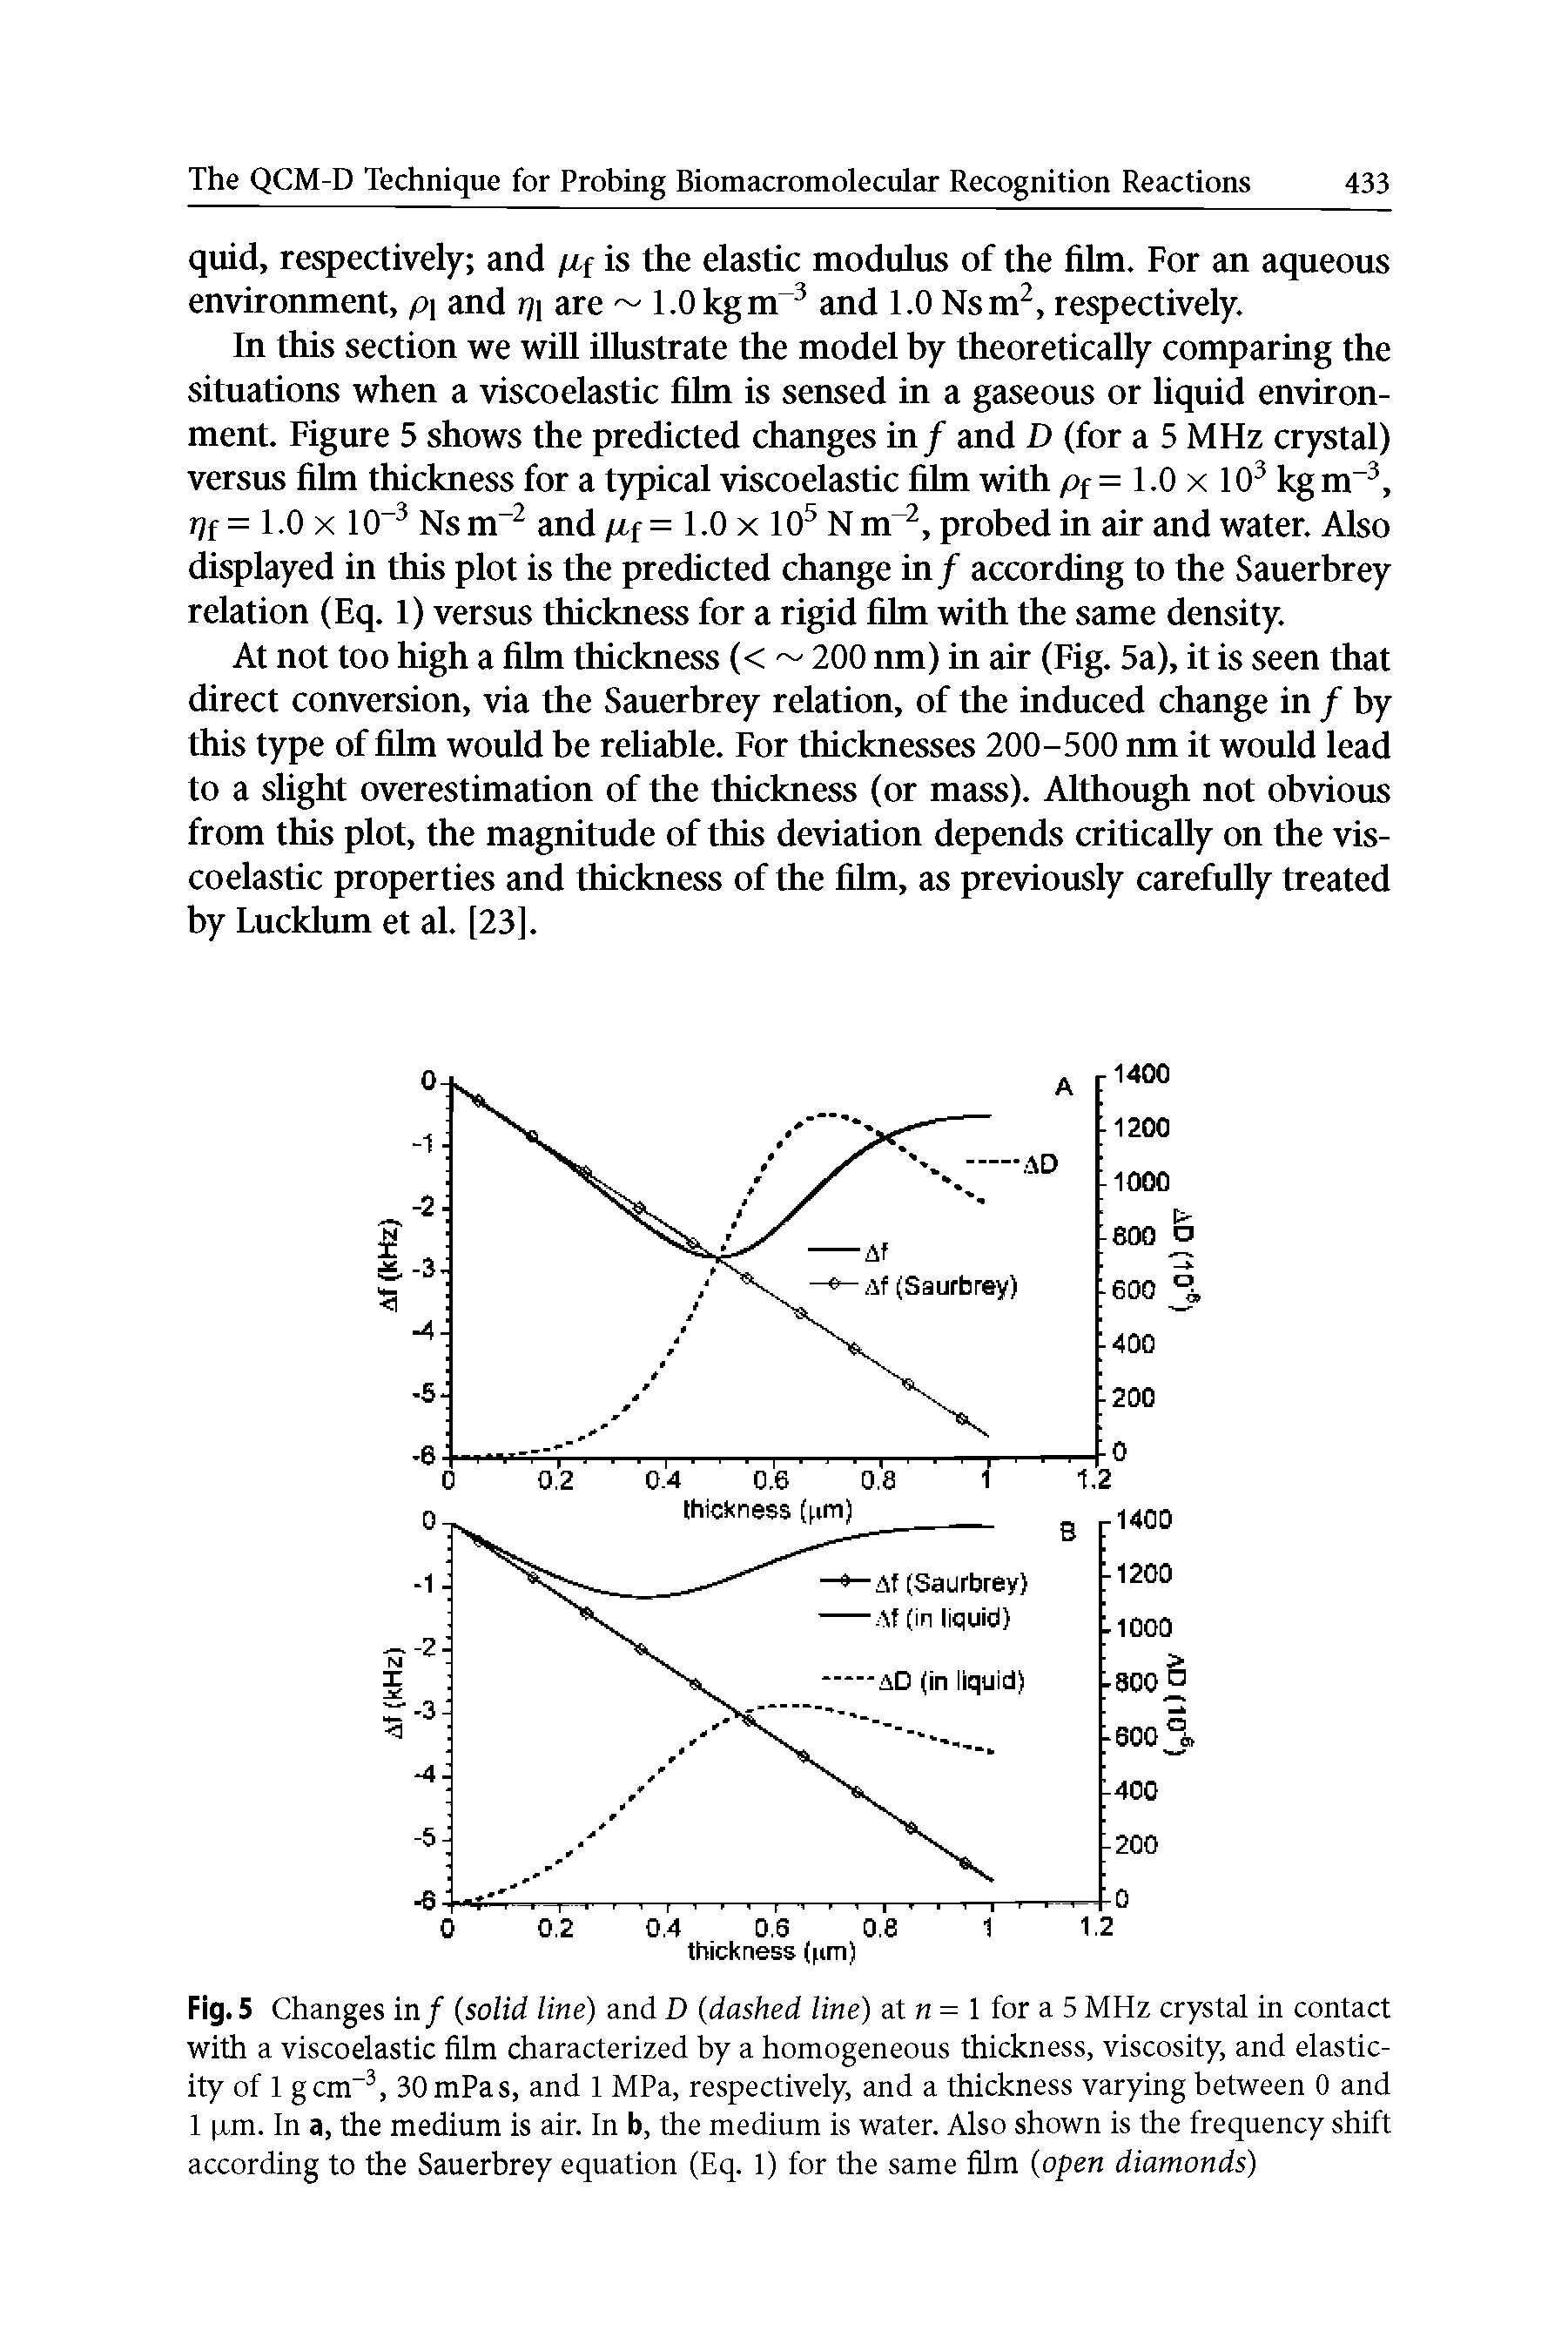 Fig. 5 Changes in / (solid line) and D (dashed line) at = 1 for a 5 MHz crystal in contact with a viscoelastic film characterized by a homogeneous thickness, viscosity, and elasticity of 1 gcm , 30mPas, and 1 MPa, respectively, and a thickness varying between 0 and 1 p.m. In a, the medium is air. In b, the medium is water. Also shown is the frequency shift according to the Sauerbrey equation (Eq. 1) for the same film (open diamonds)...